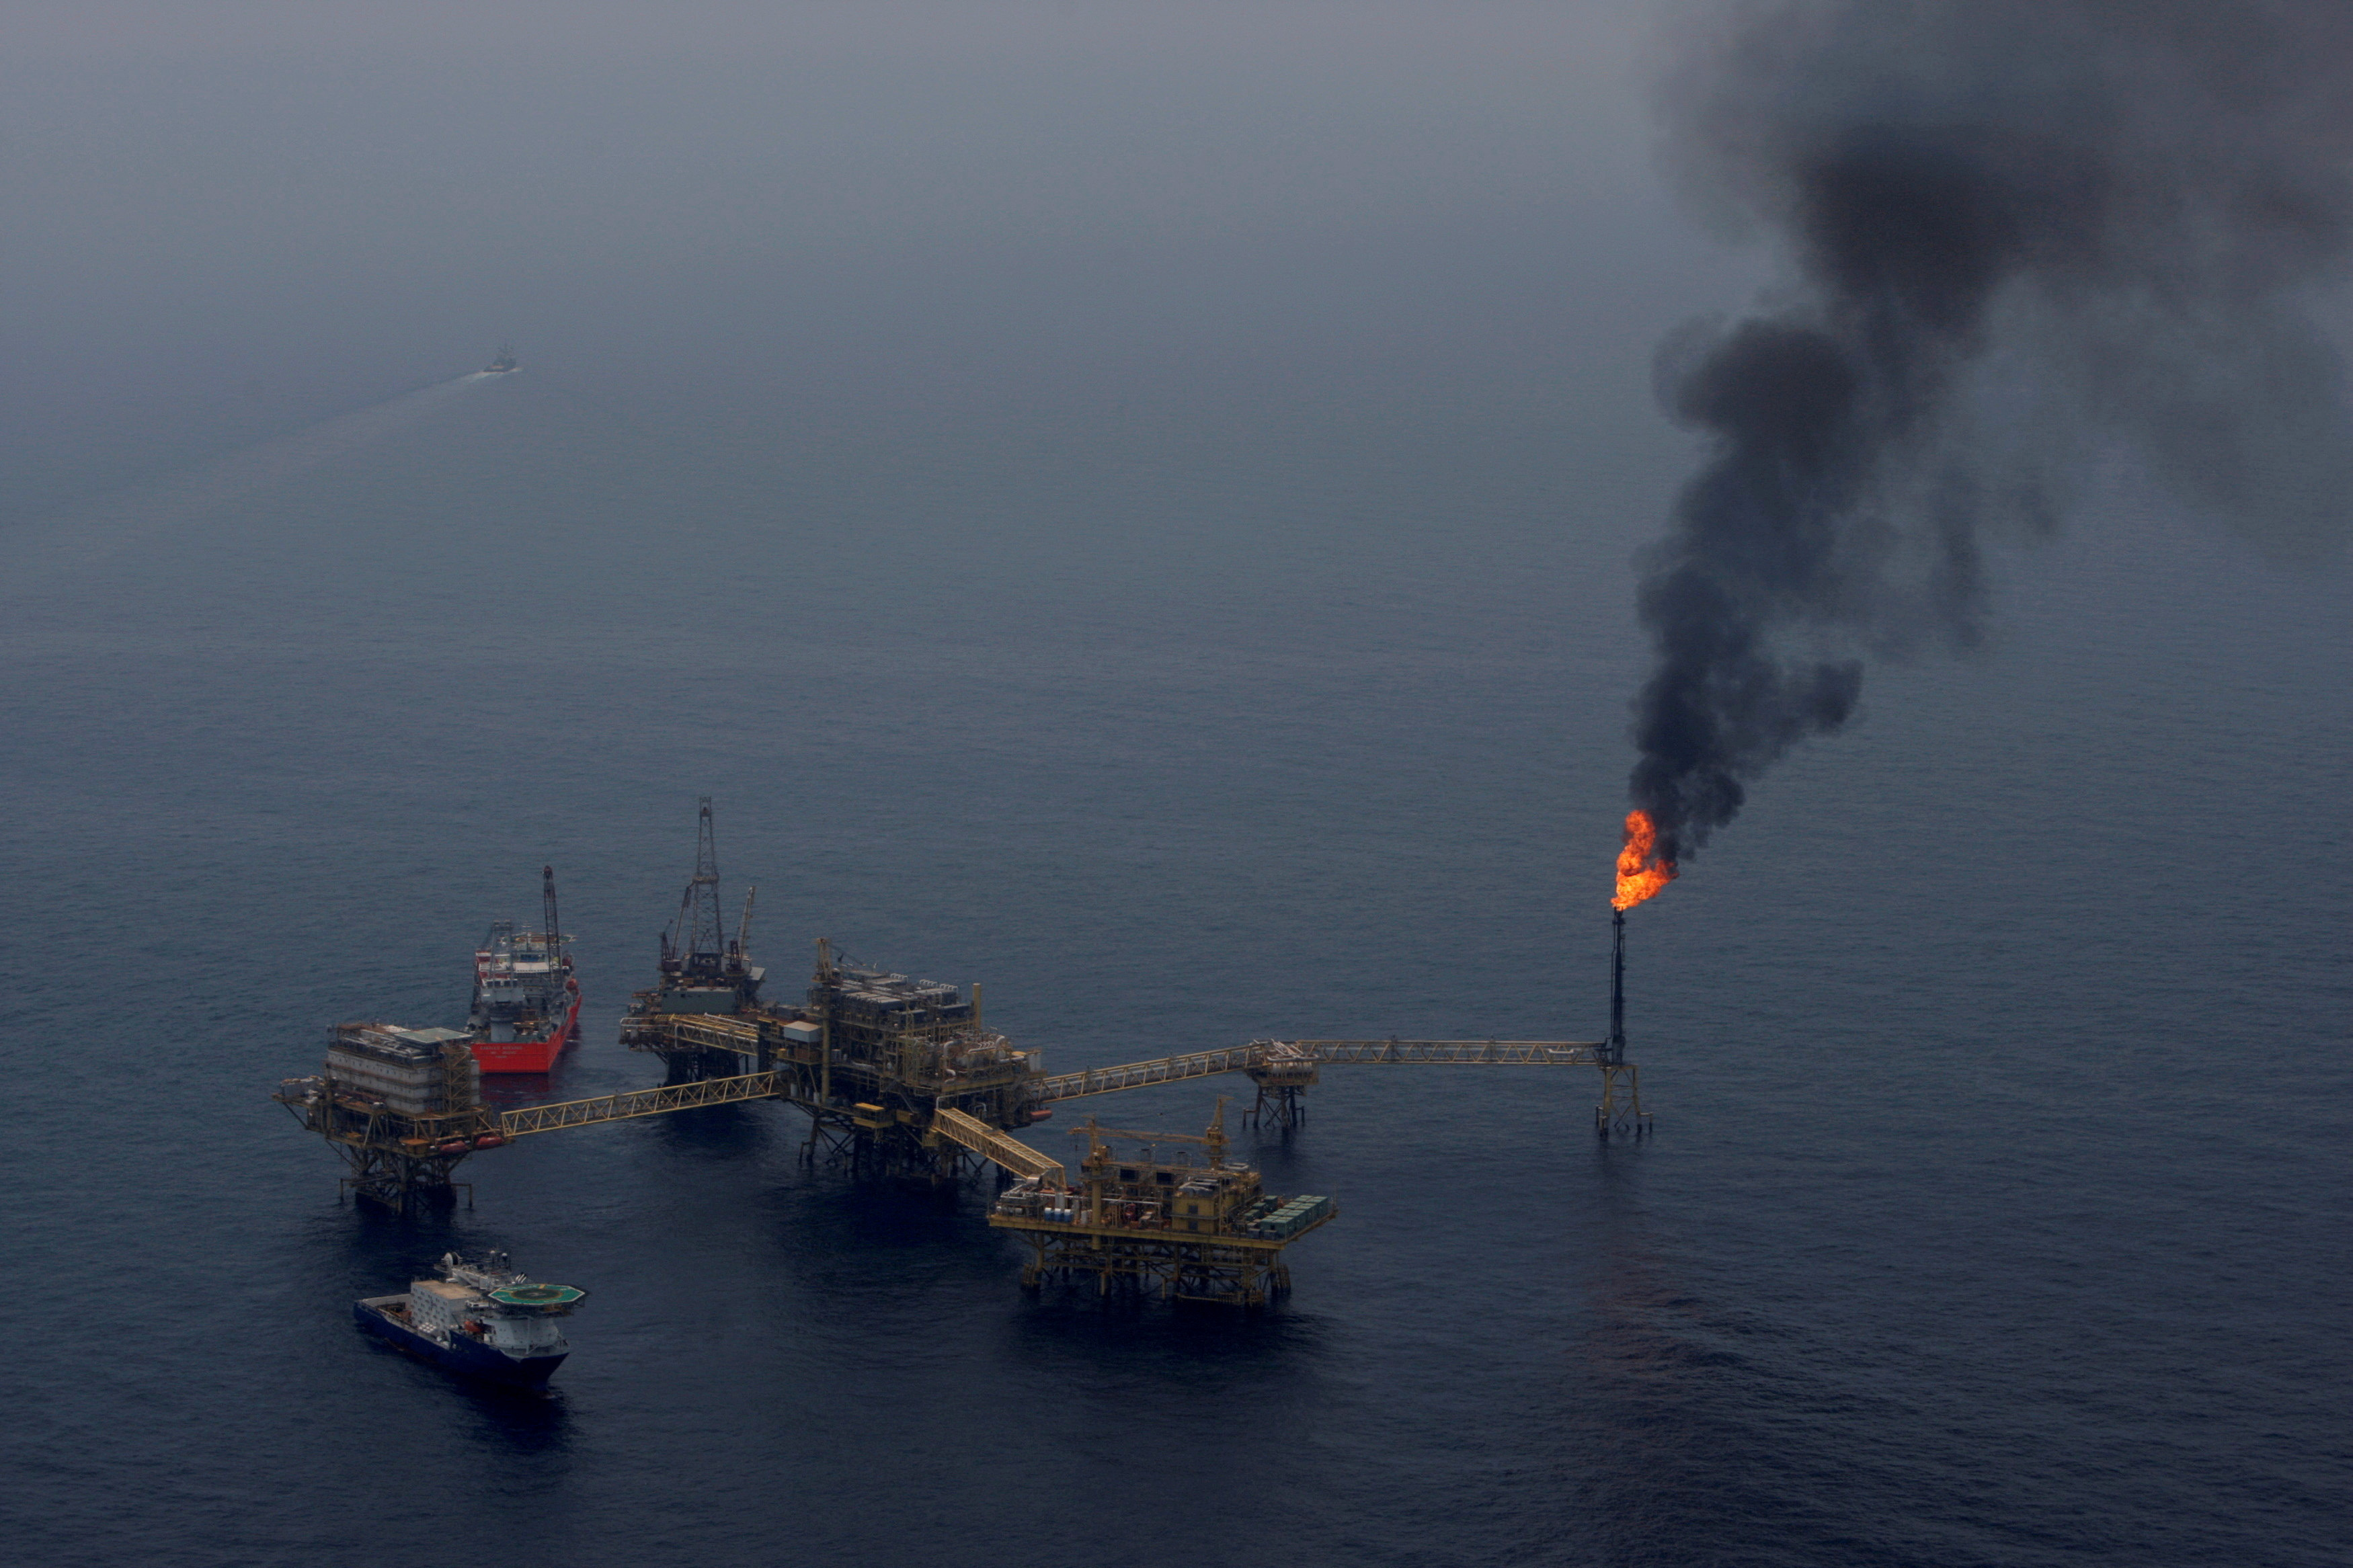 Gas flaring is seen at Mexico's state-run oil monopoly Pemex platform "Ku Maloob Zaap" in the Northeast Marine Region of Pemex Exploration and Production in the Bay of Campeche